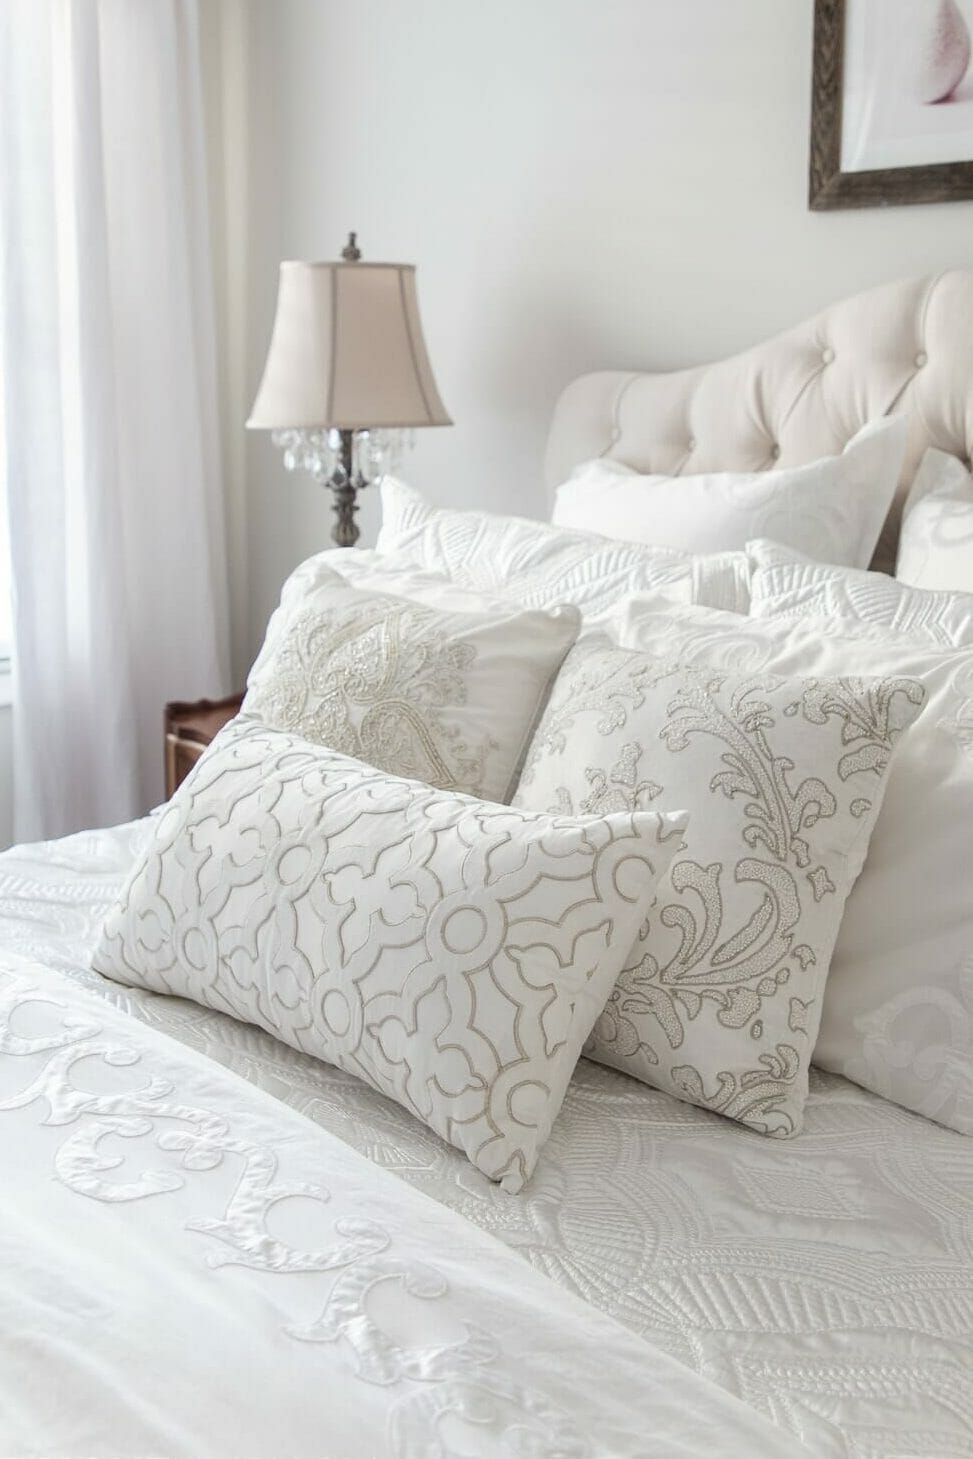 How To Decorate A Bed With A White Comforter 1909 edited - How To Decorate A Bed With A White Comforter?